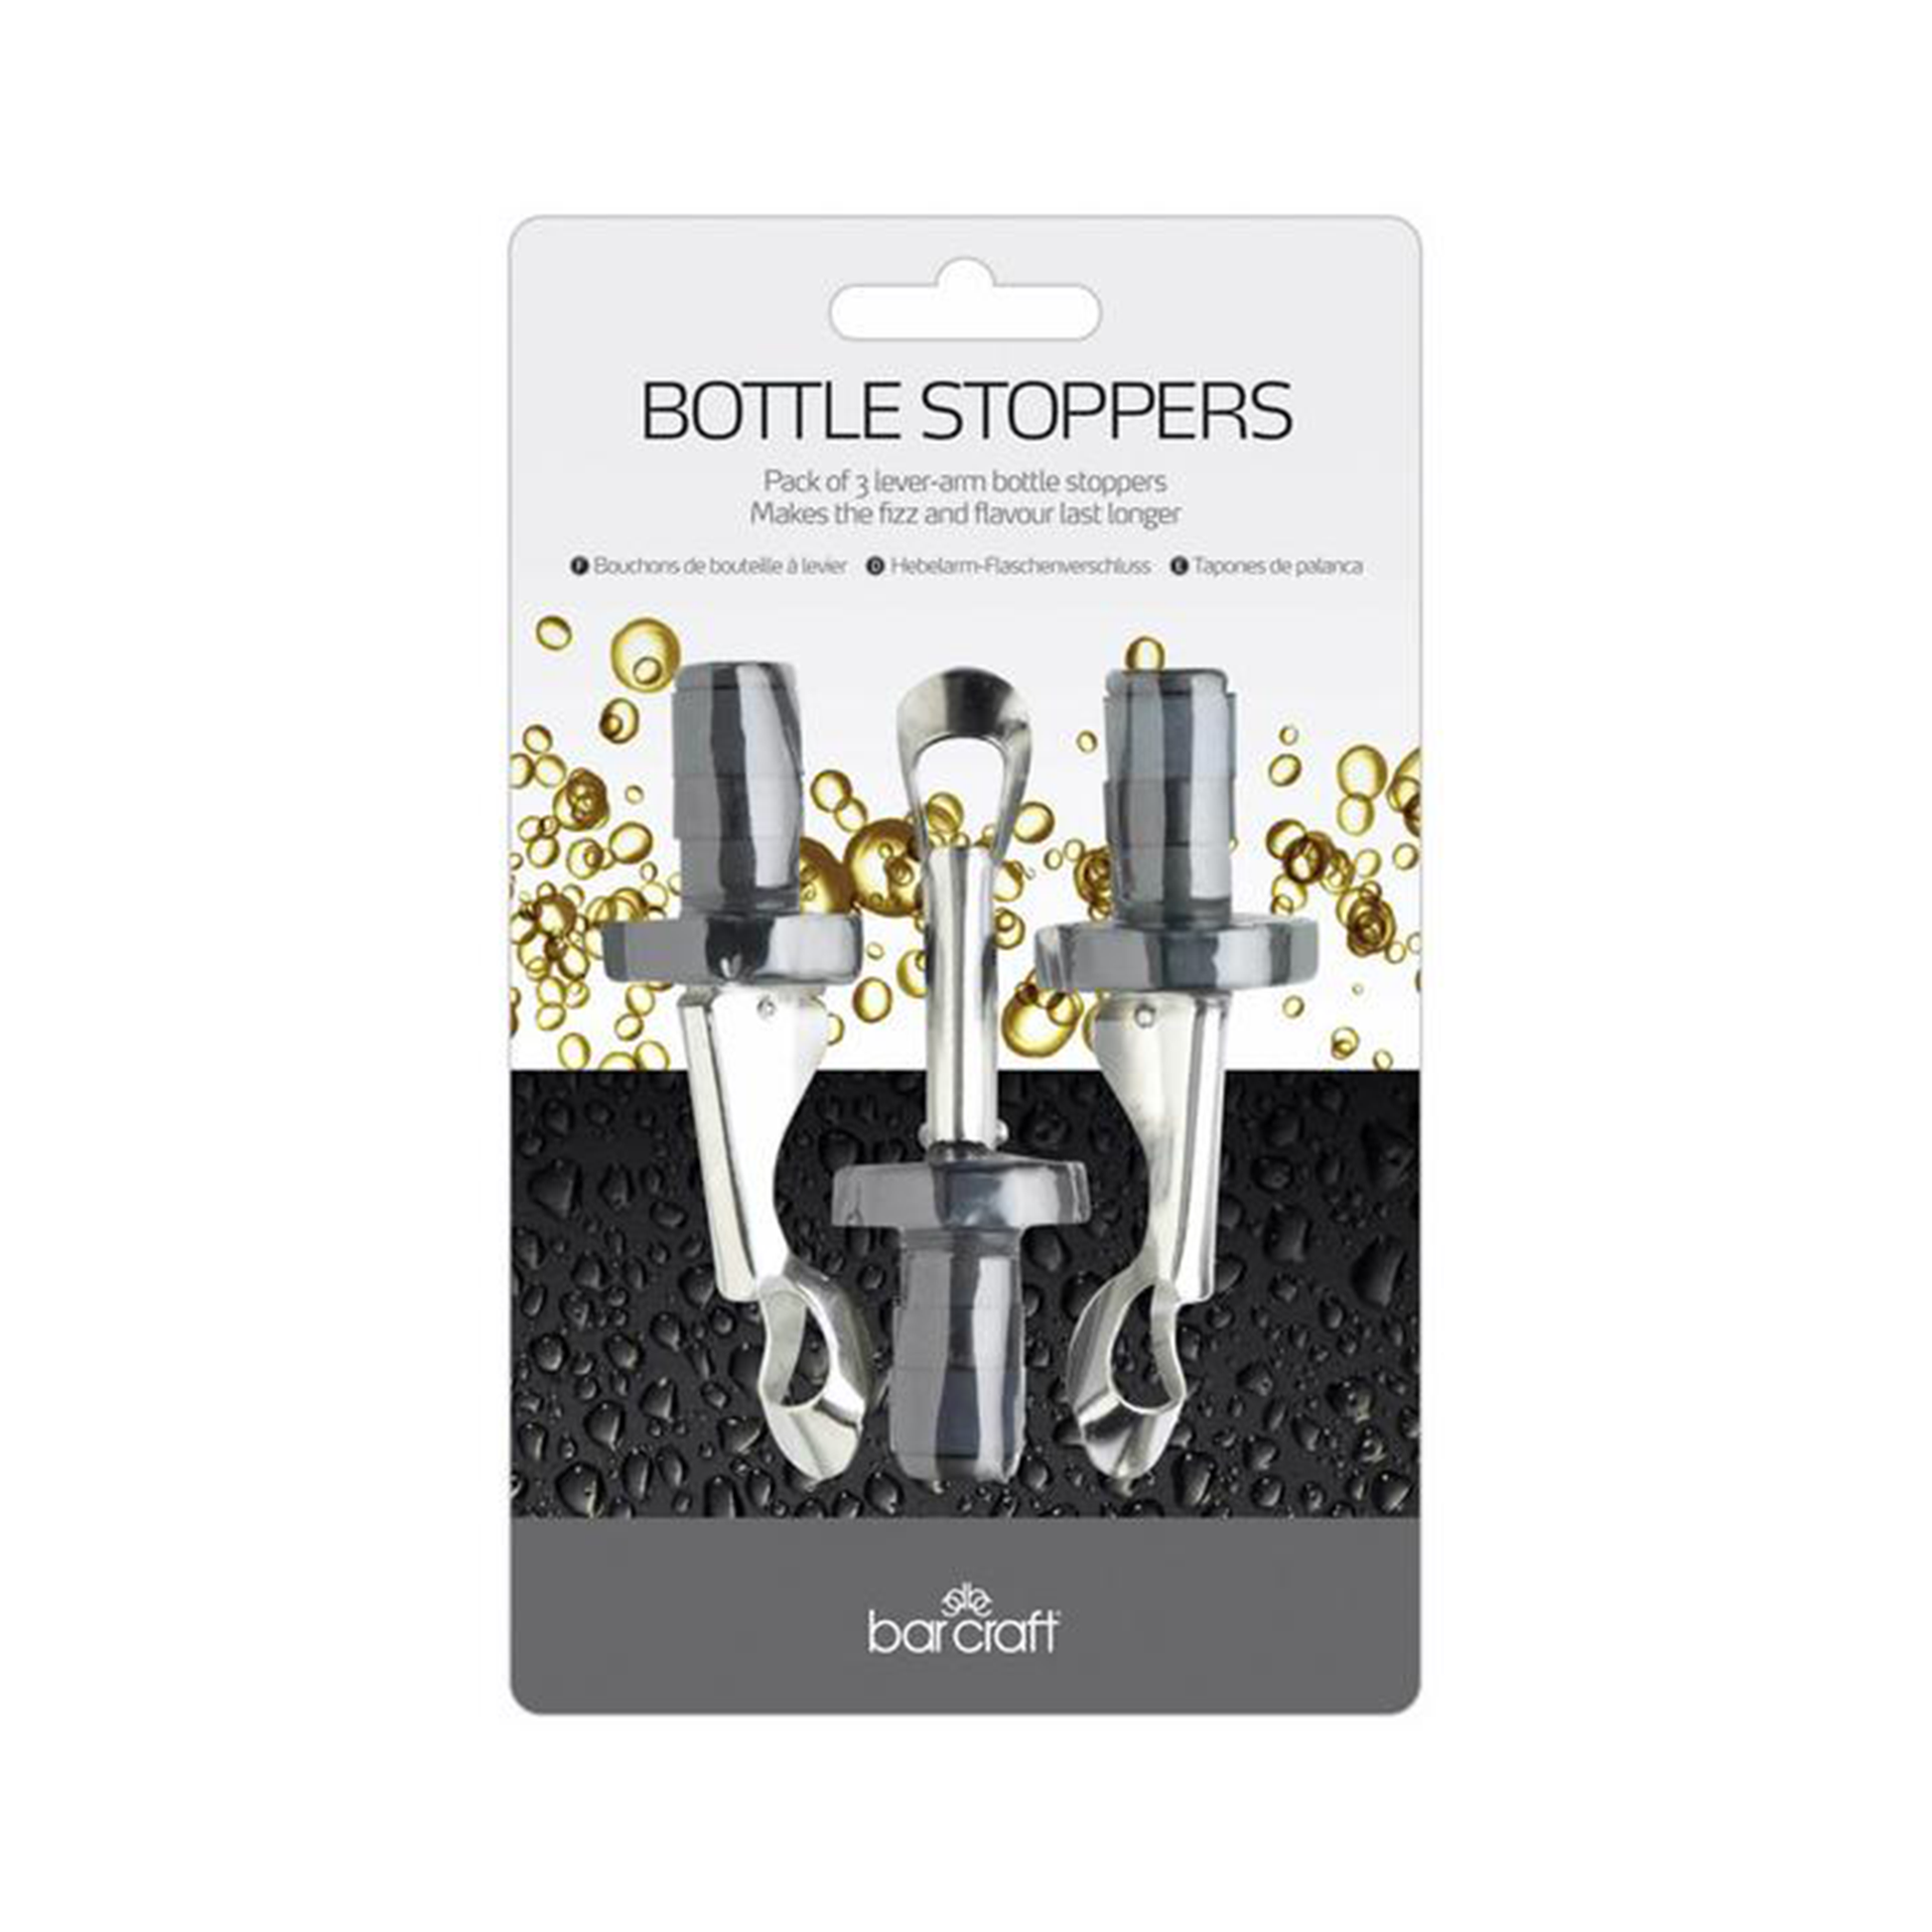 the bottle stoppers in their packaging